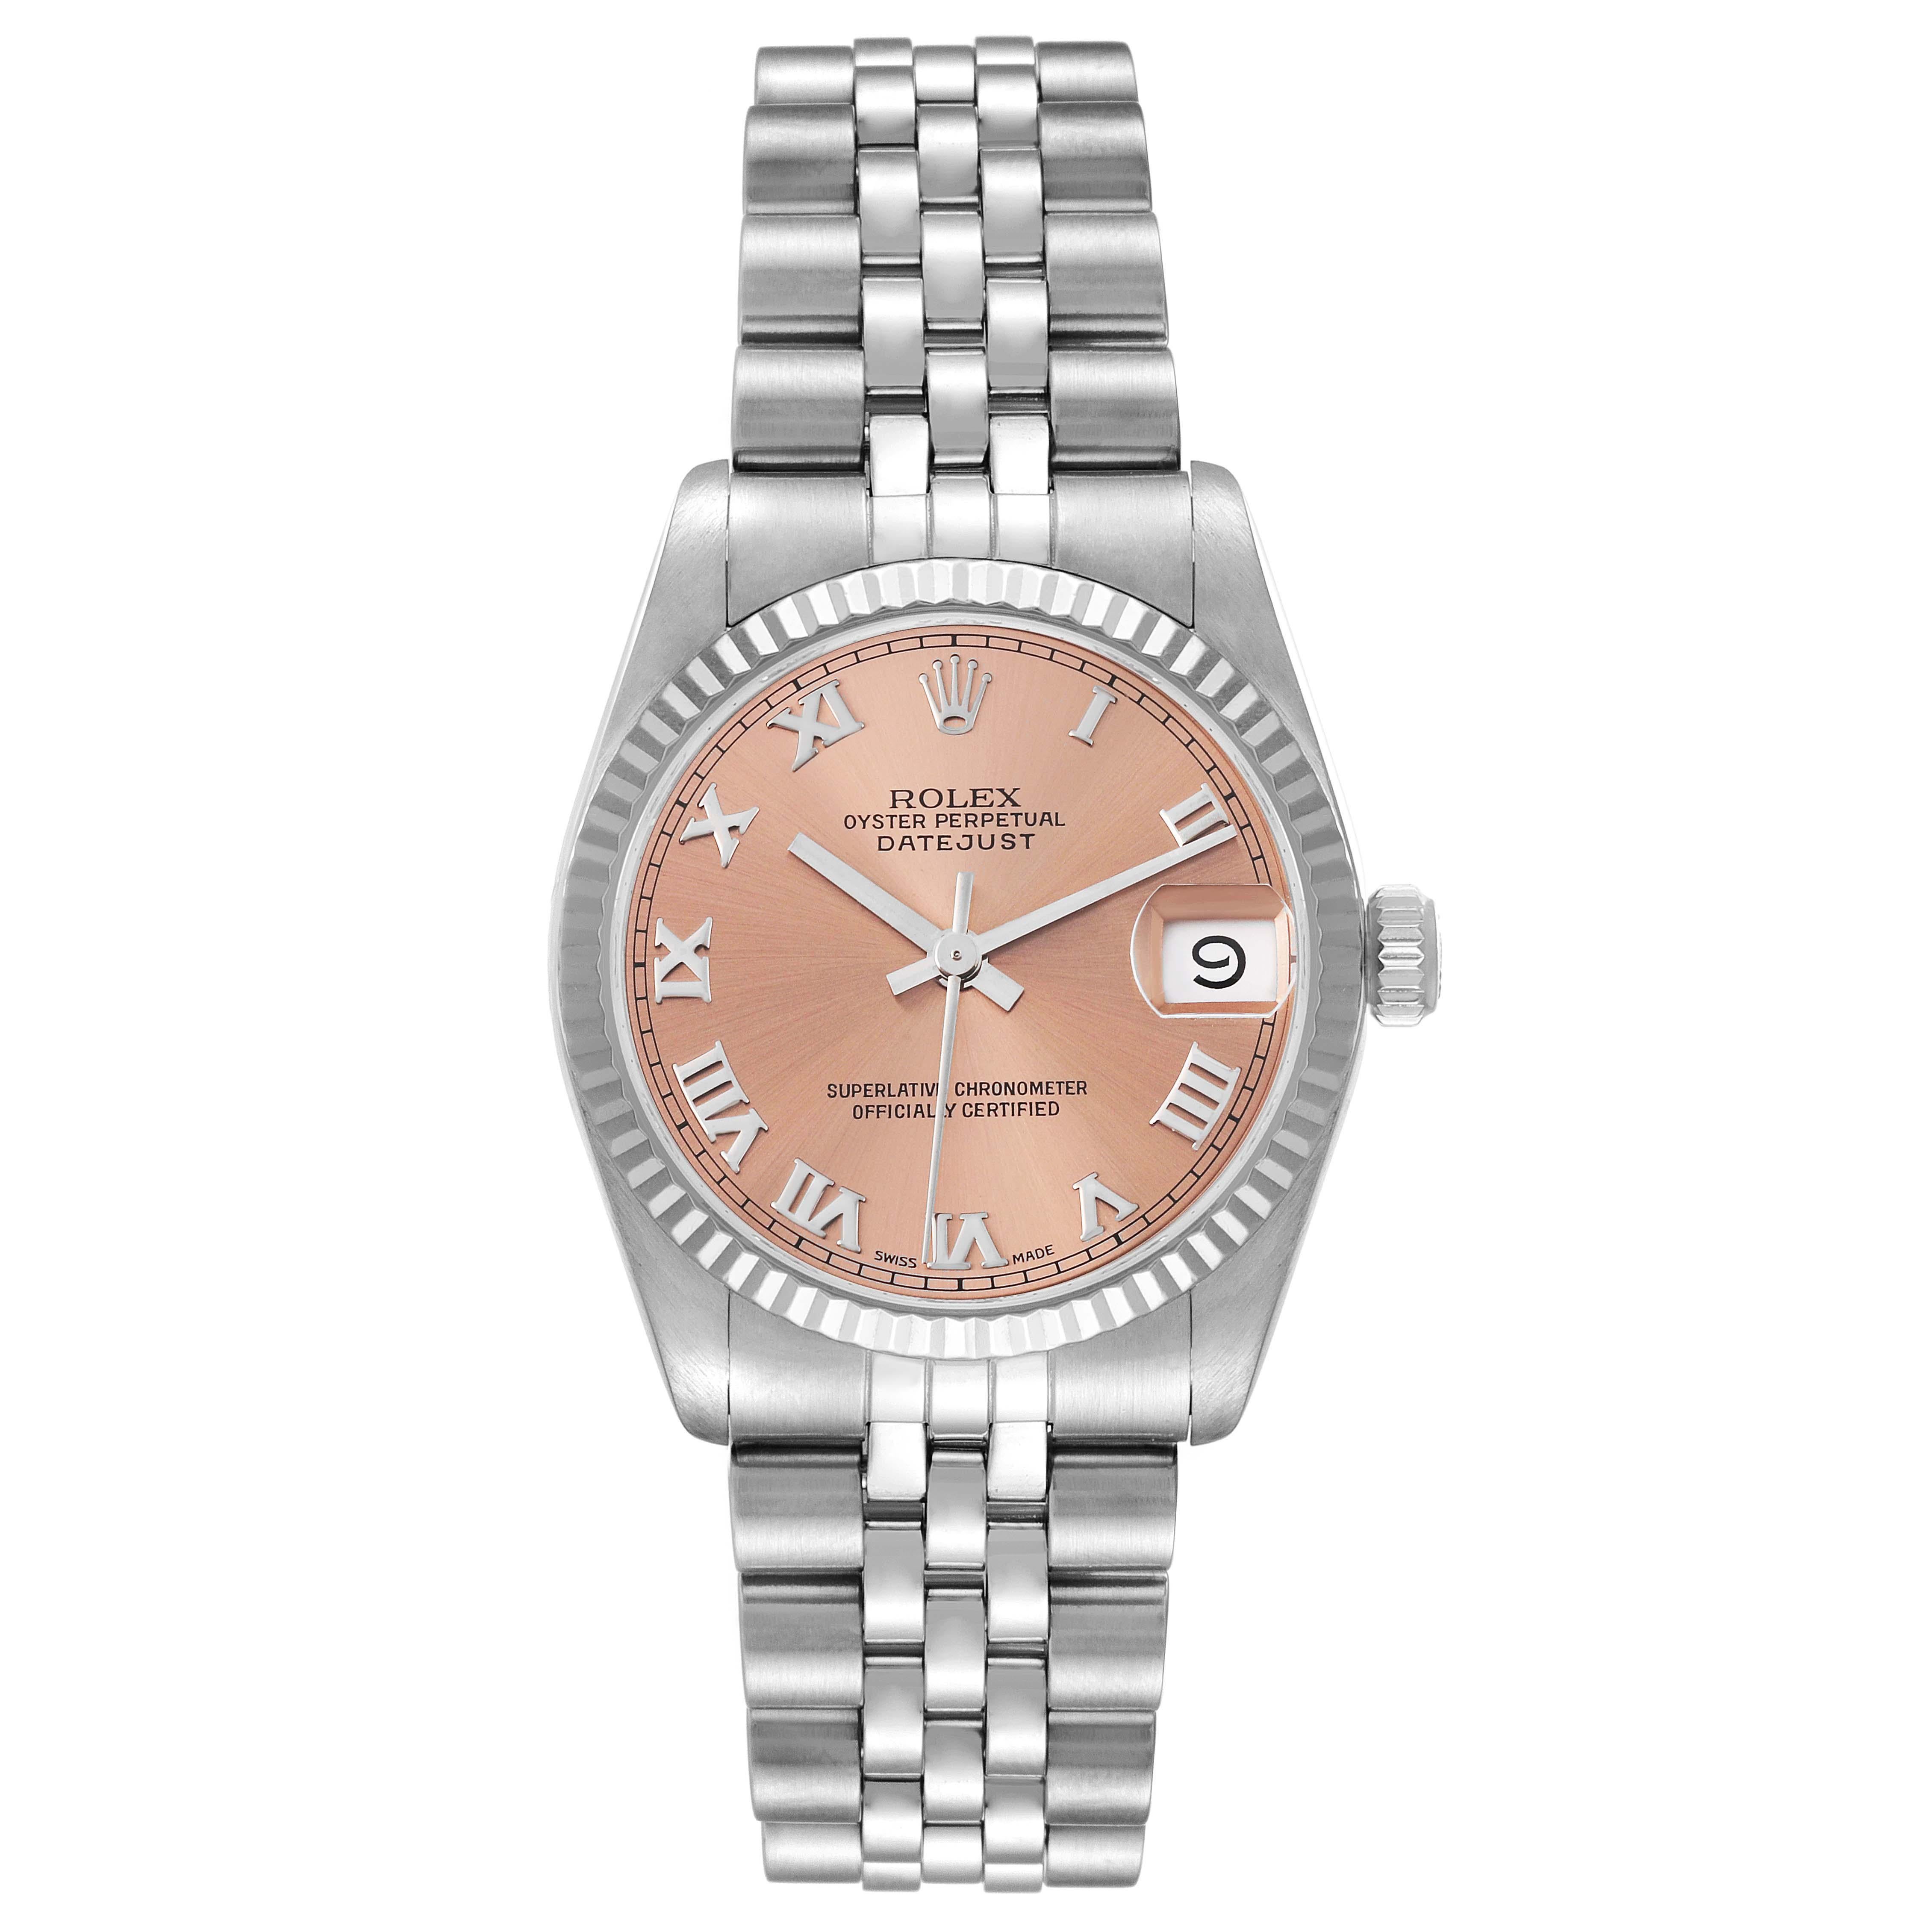 Rolex Datejust Midsize Steel White Gold Salmon Dial Ladies Watch 68274. Officially certified chronometer automatic self-winding movement. Stainless steel oyster case 31.0 mm in diameter. Rolex logo on the crown. 18k white gold fluted bezel. Scratch